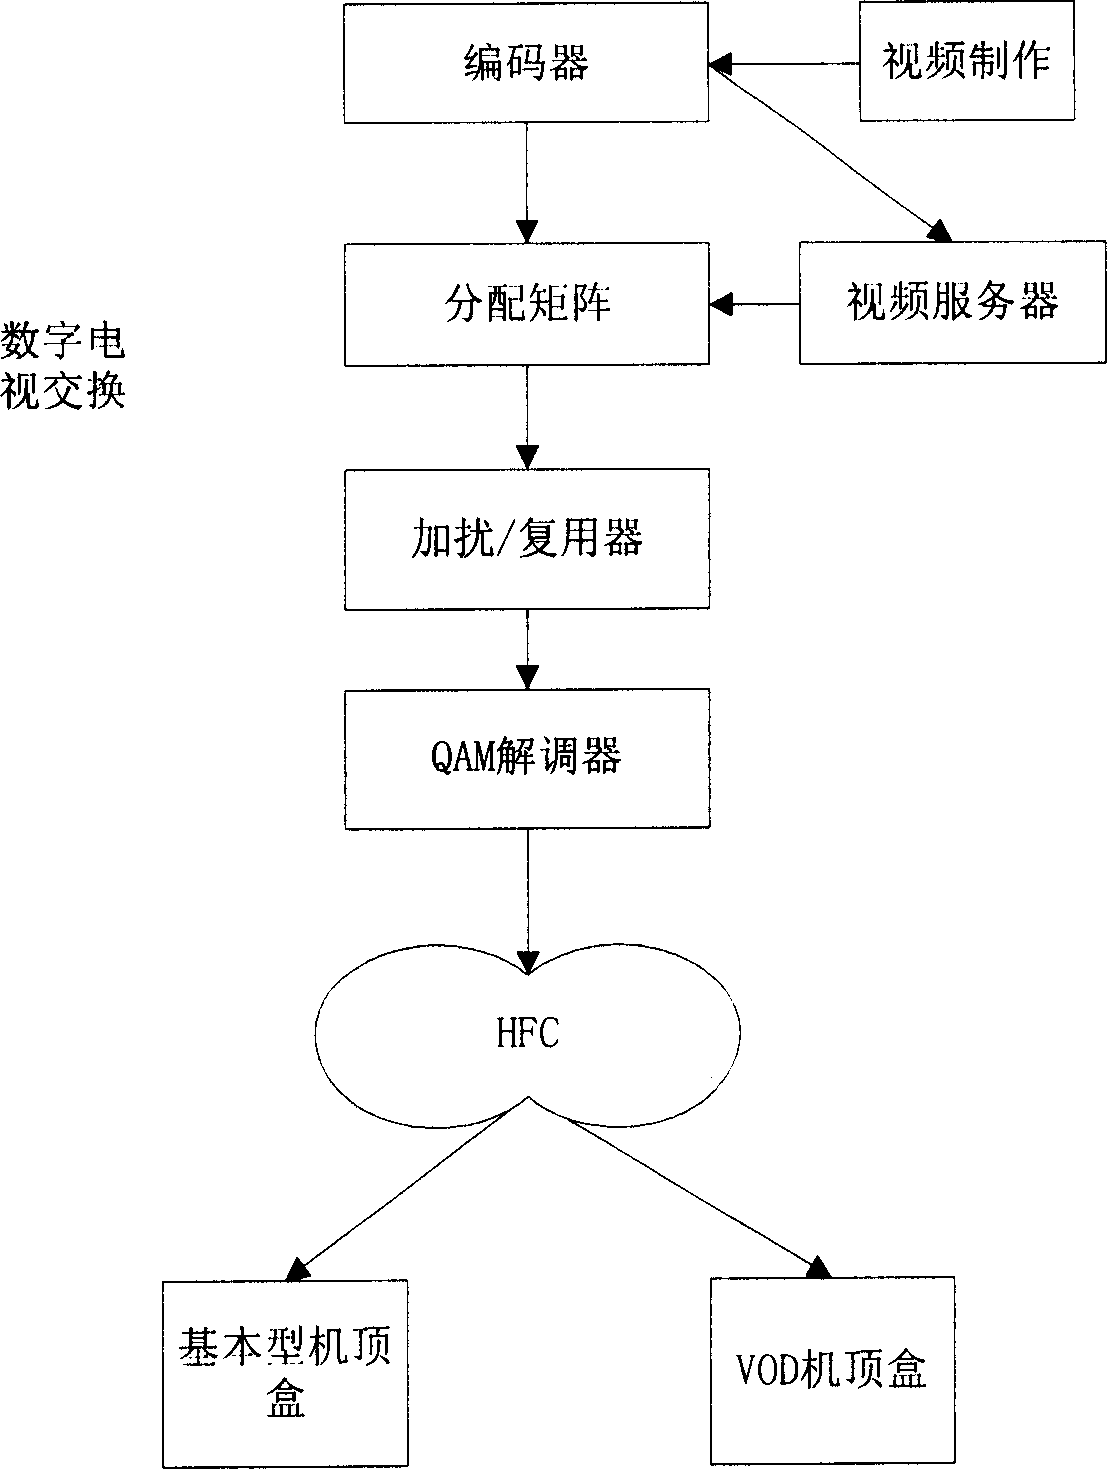 Mobile video broadcasting system and method thereof